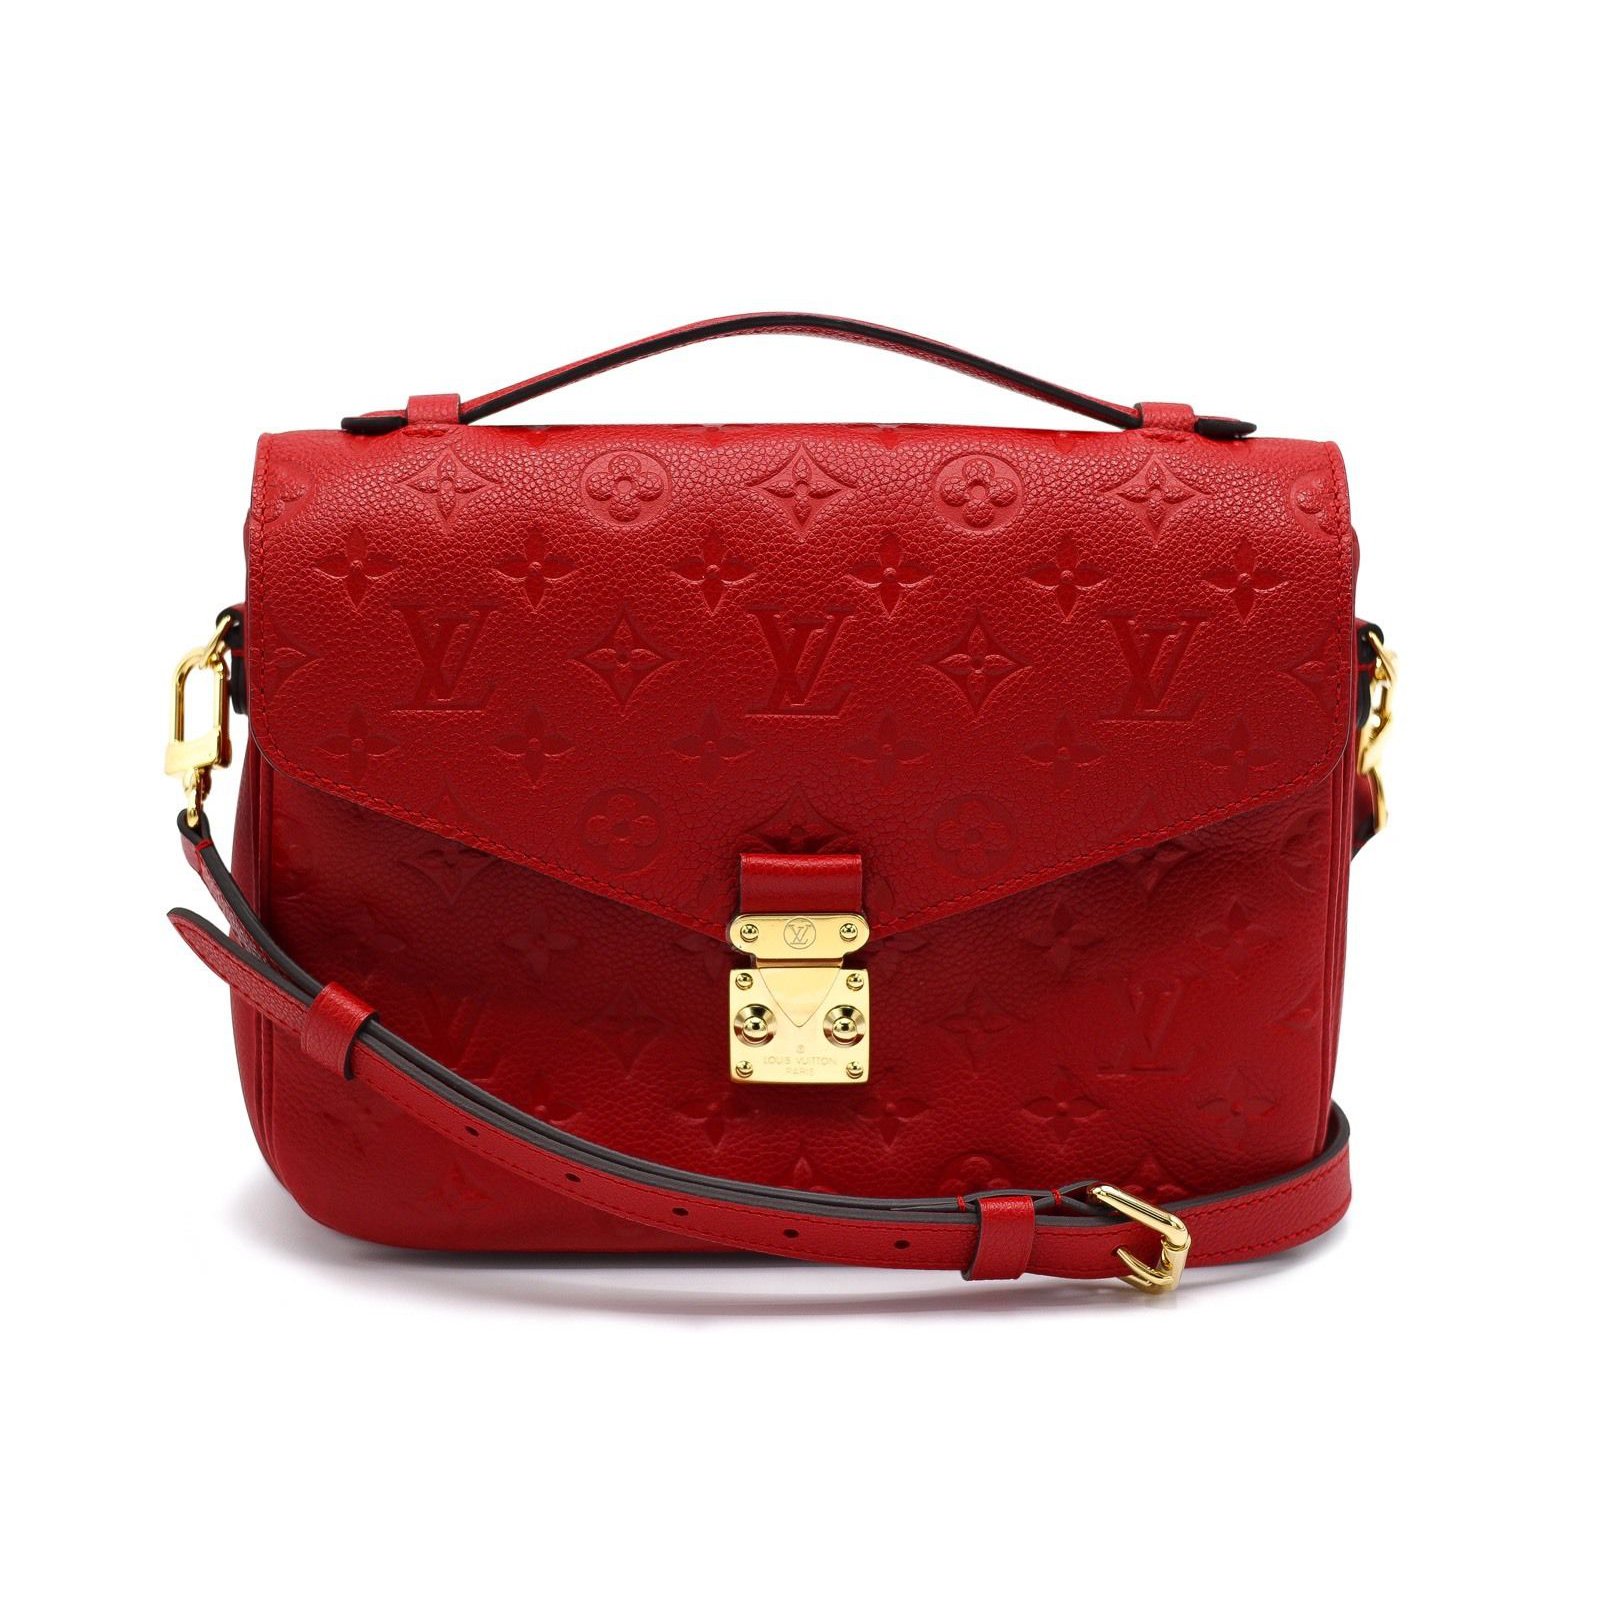 Louis Vuitton Handbags Black And Red | Confederated Tribes of the Umatilla Indian Reservation